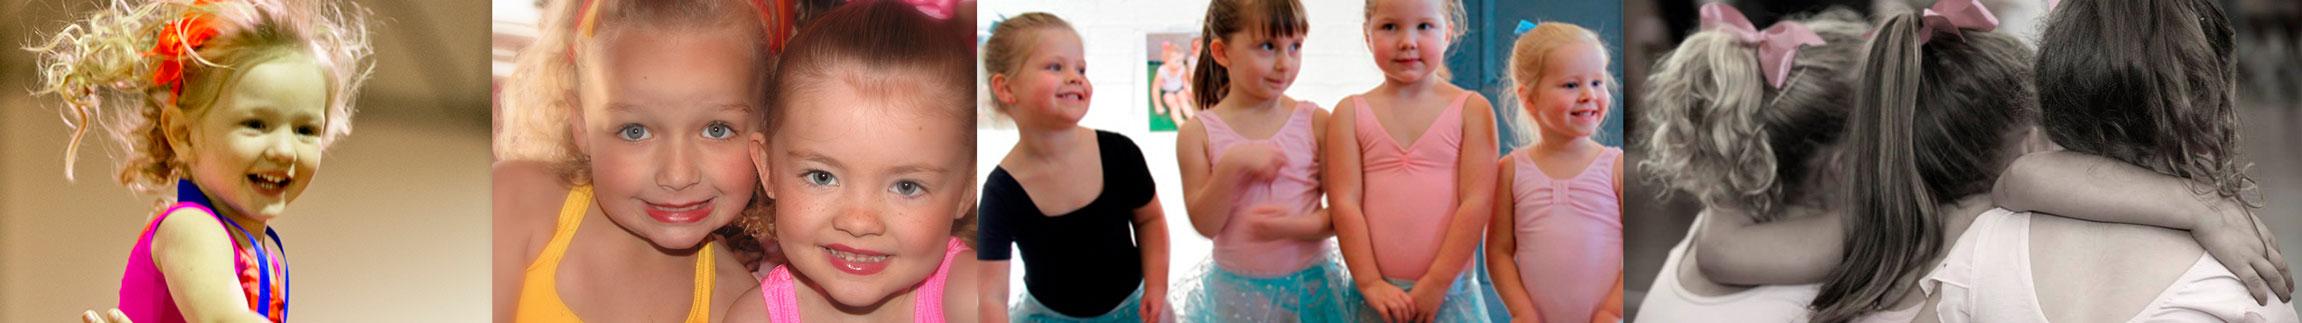 Classes at Template Physie - for preschool girls teens and ladies aged 3 years old and up